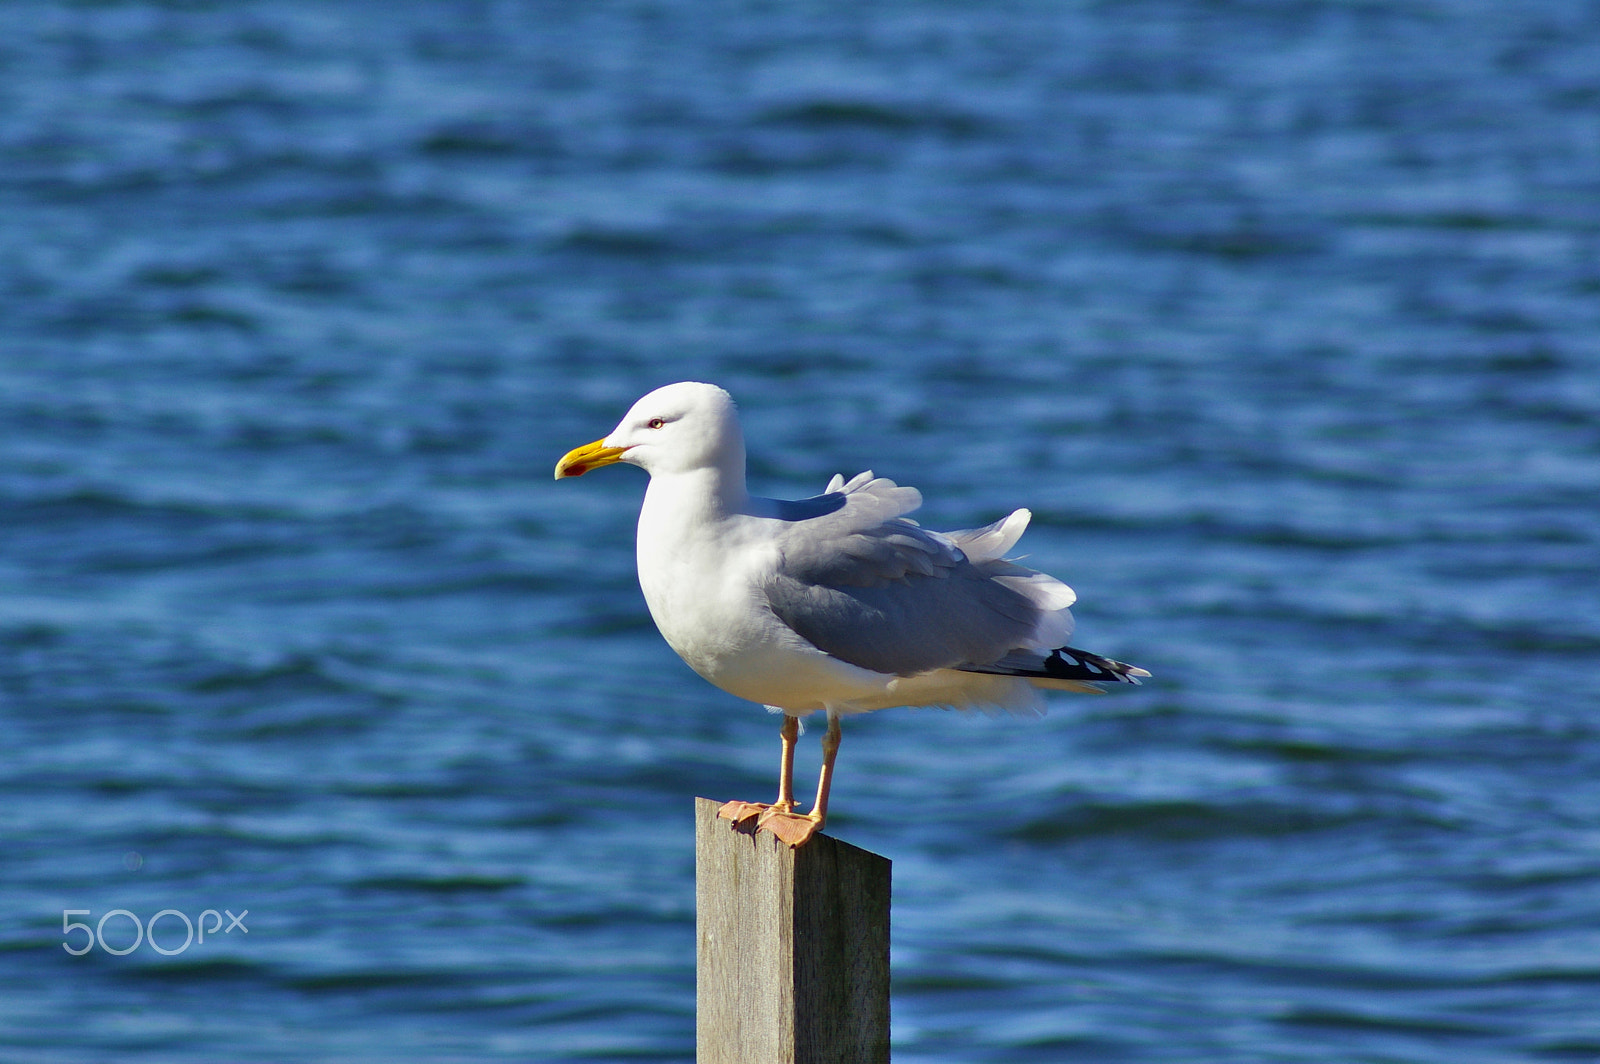 Pentax K100D sample photo. Herring gull perched on a wooden mooring post photography